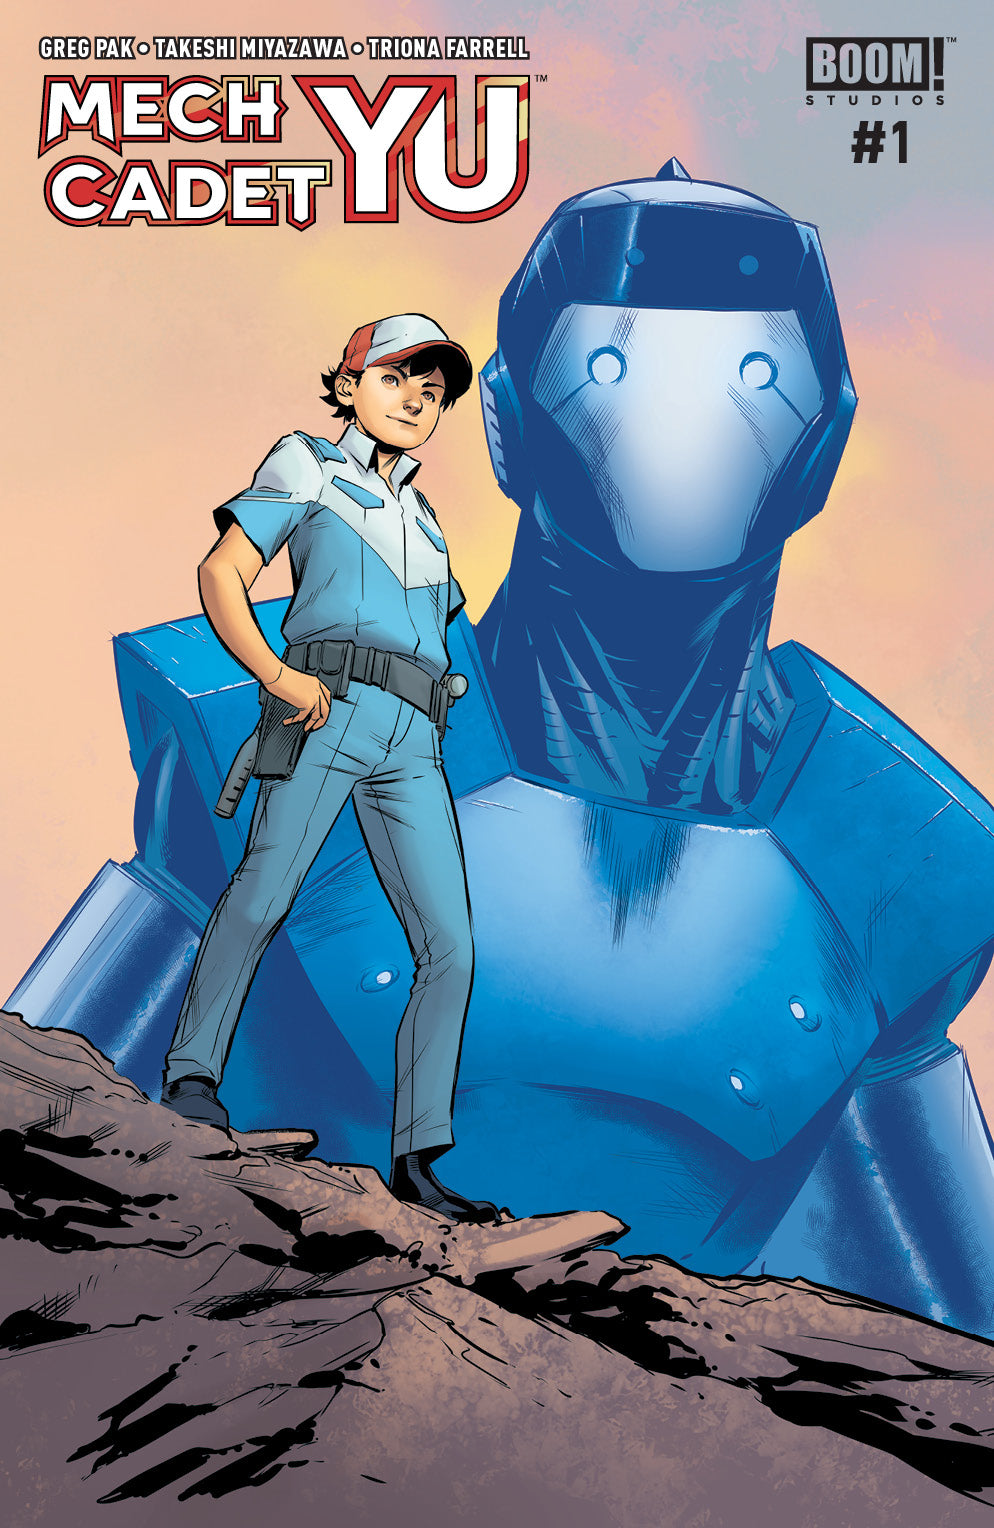 MECH CADET YU #1 B Boom 2017 Marcus To Sub Connecting Variant